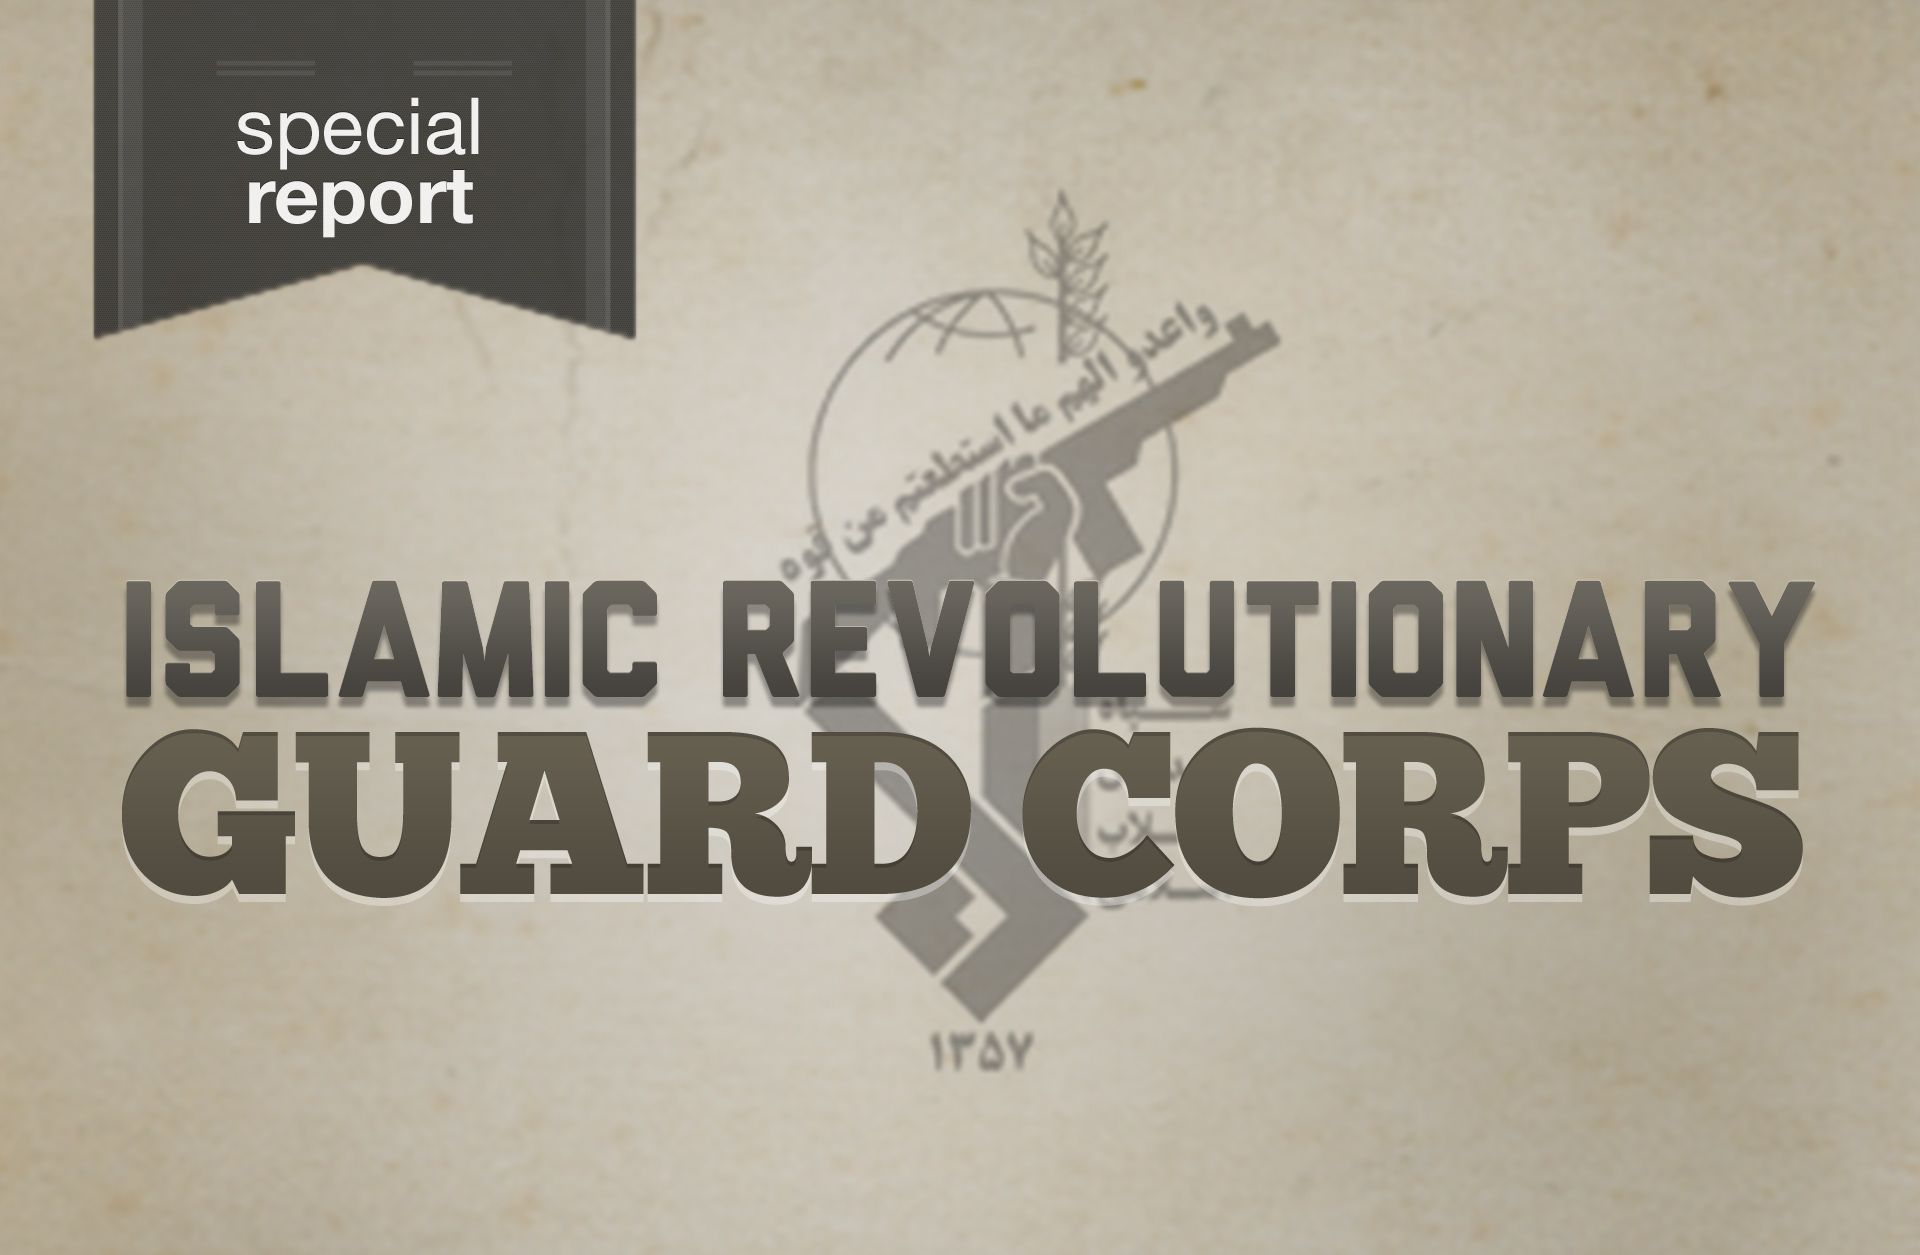 The Islamic Revolutionary Guard Corps, Part 1: An Unconventional Military